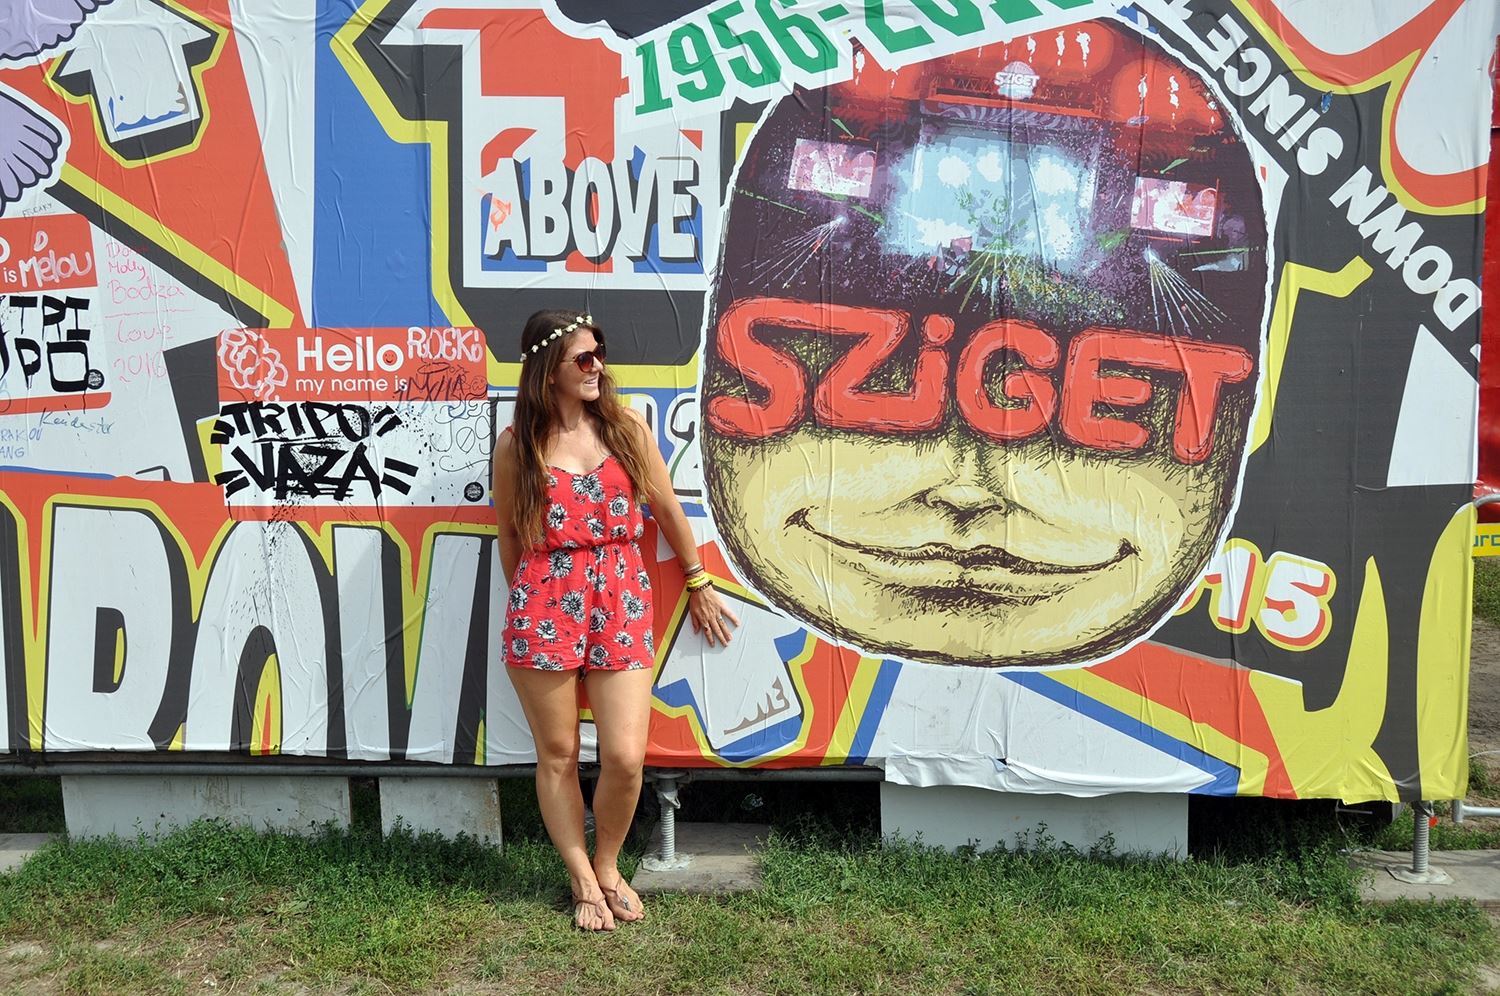 Sziget Music Festival Things to Do in Budapest Travel